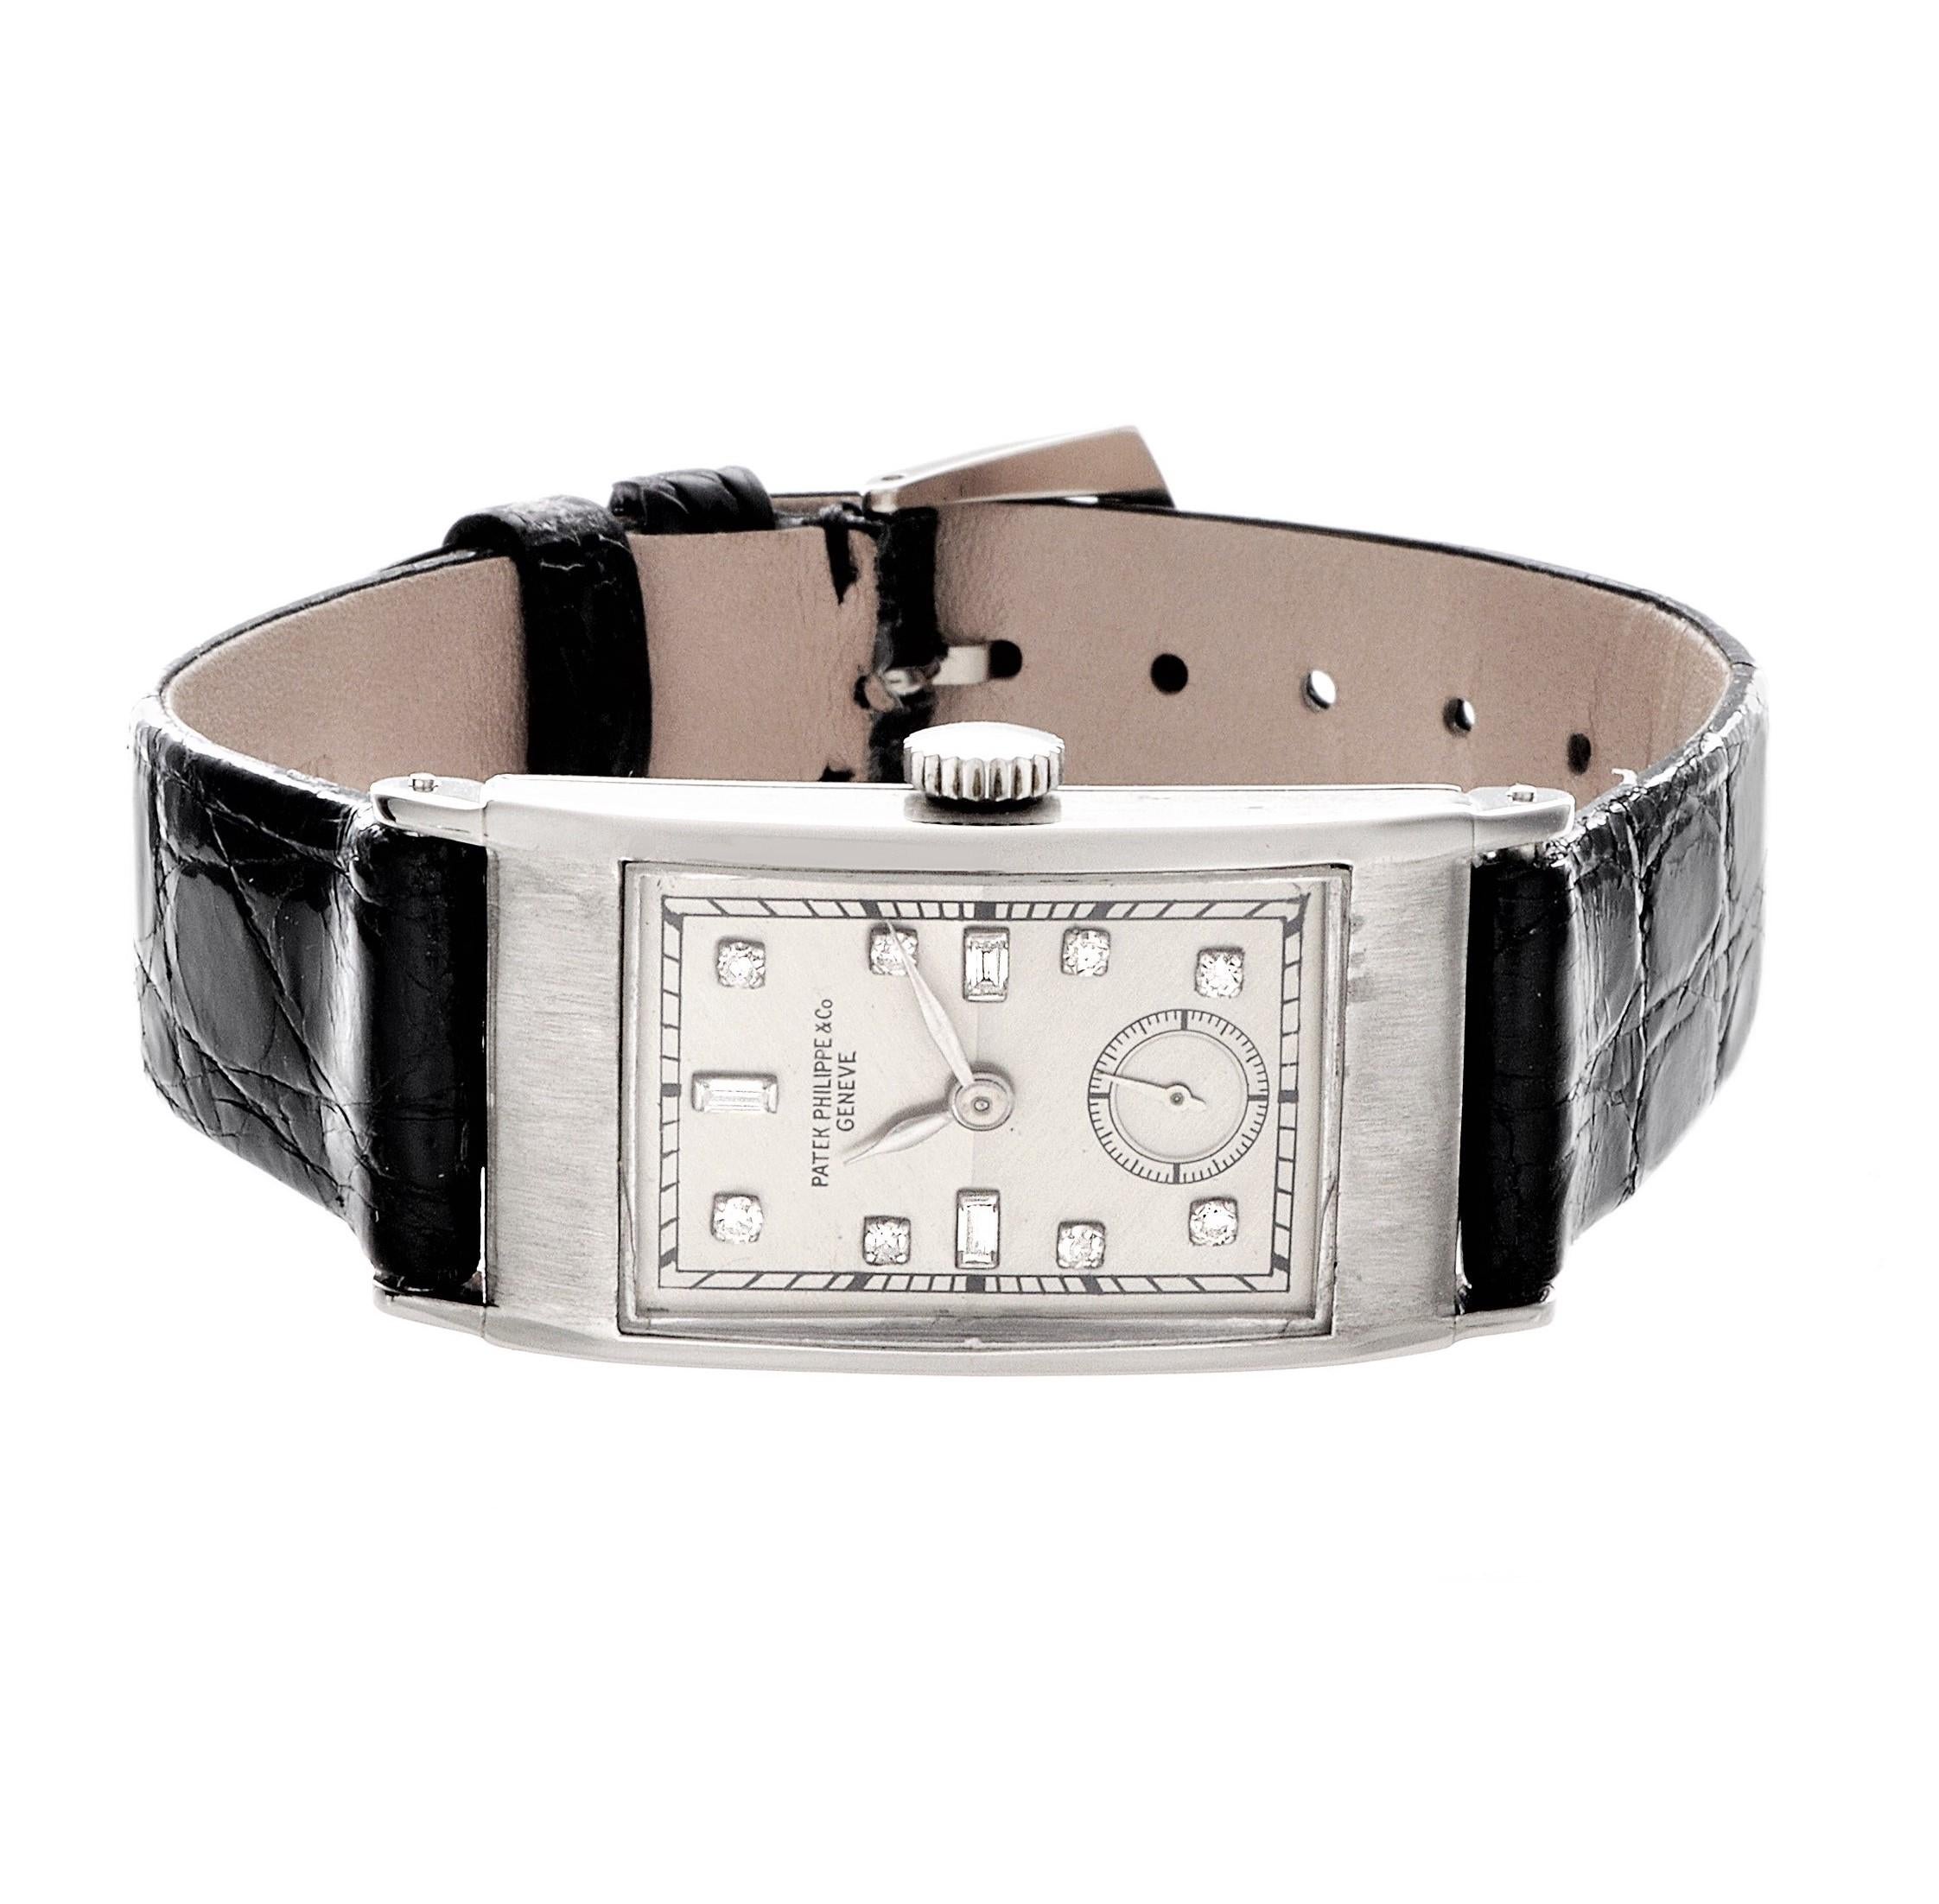 Introduction:
This 425P Tegolino Art Deco Patek Philippe watch made in Platinum with a factory diamond dial.  The watch features original facet crystal and new alligator strap and Patek Platinum Buckle.  This watch was made in 1937 and is